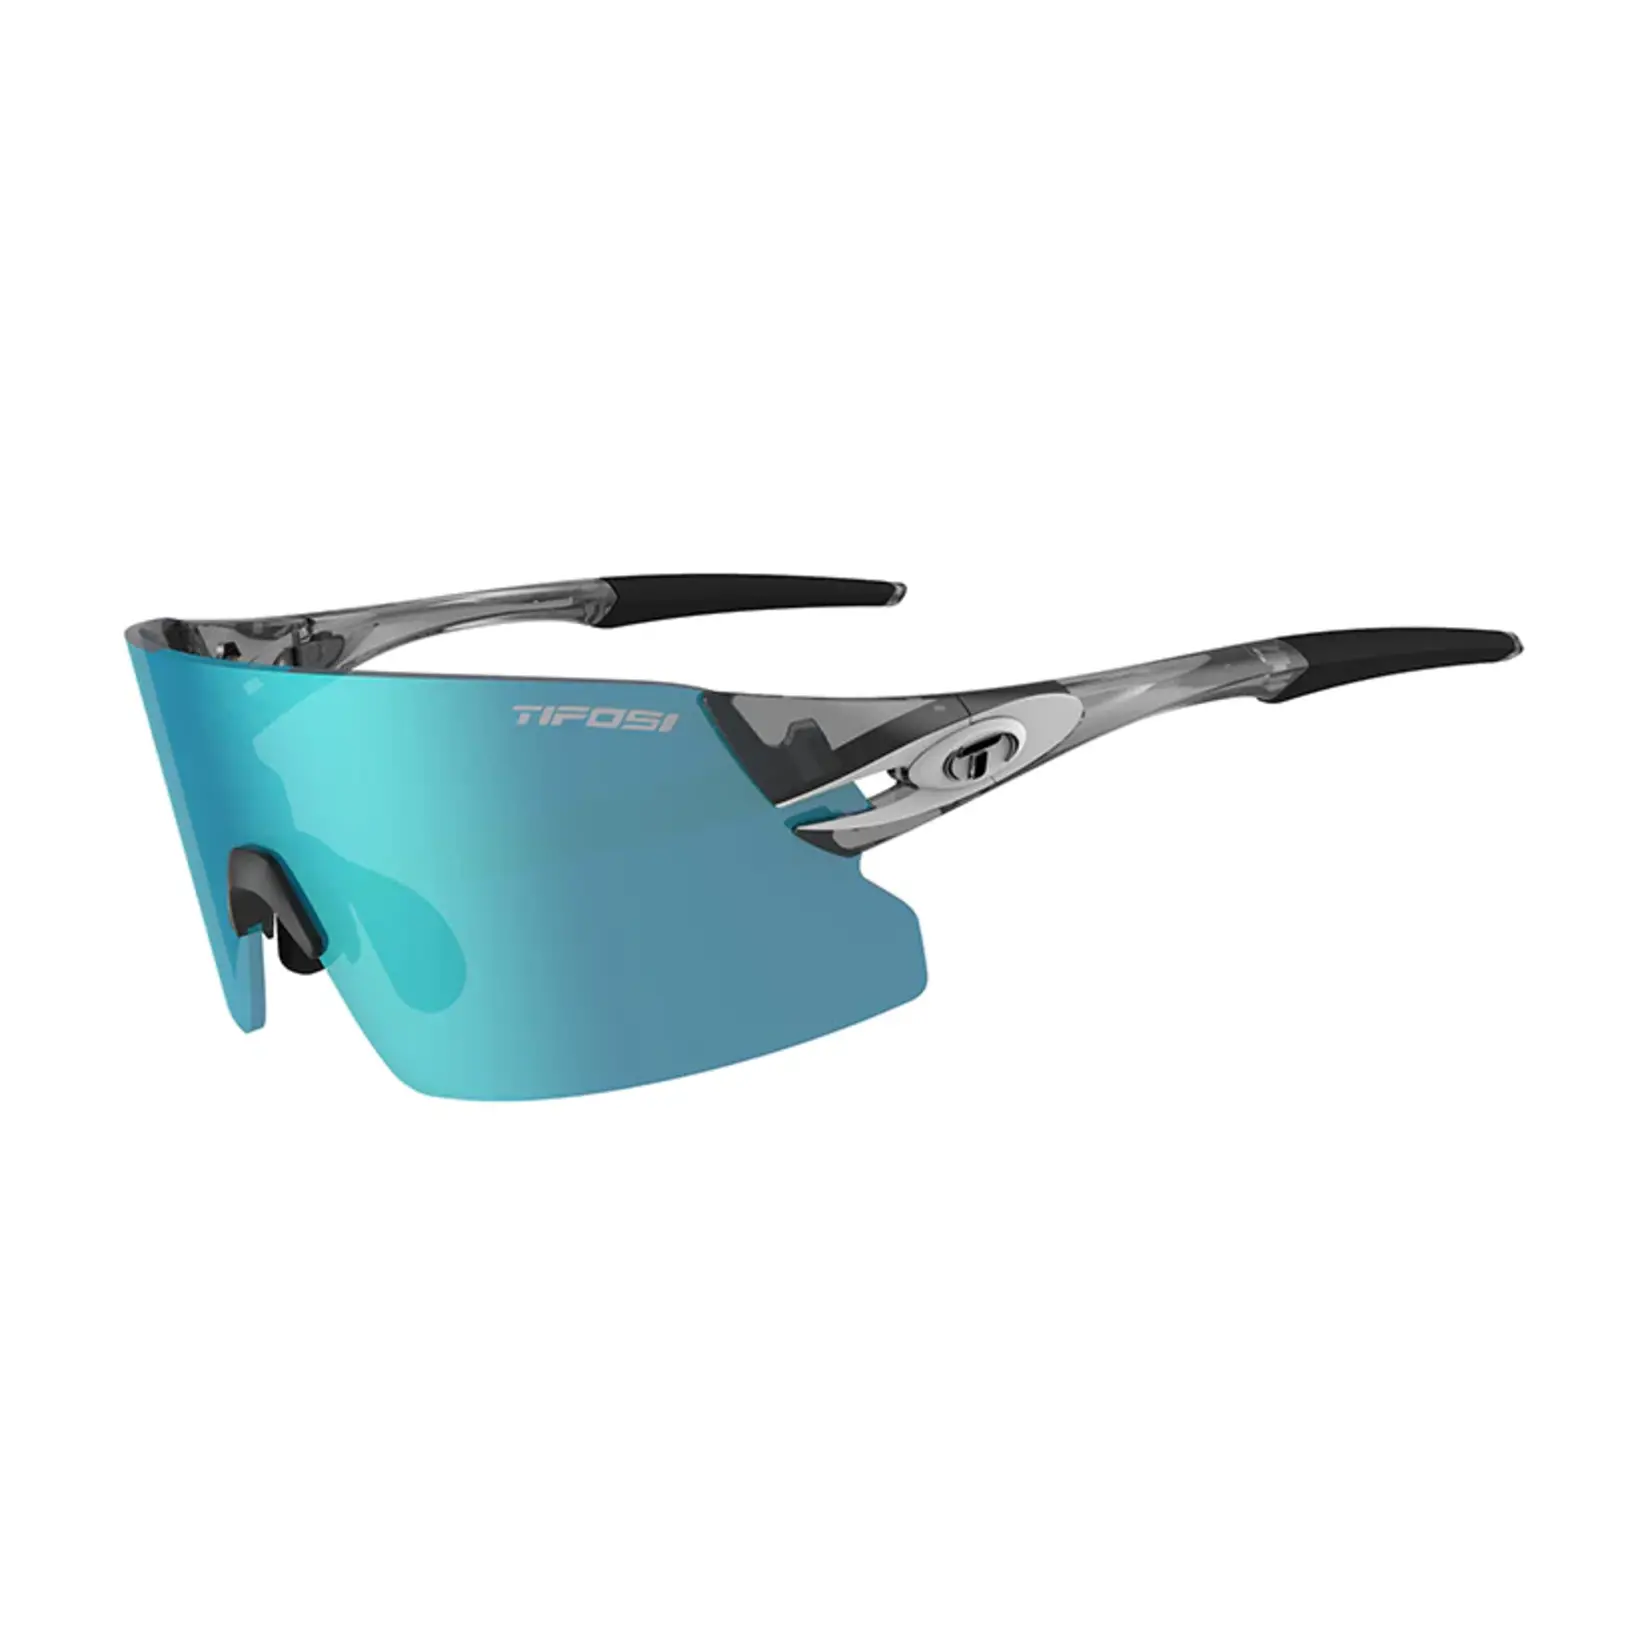 Rail XC Crystal Smoke - Clarion Blue/AC Red/Clear Lenses